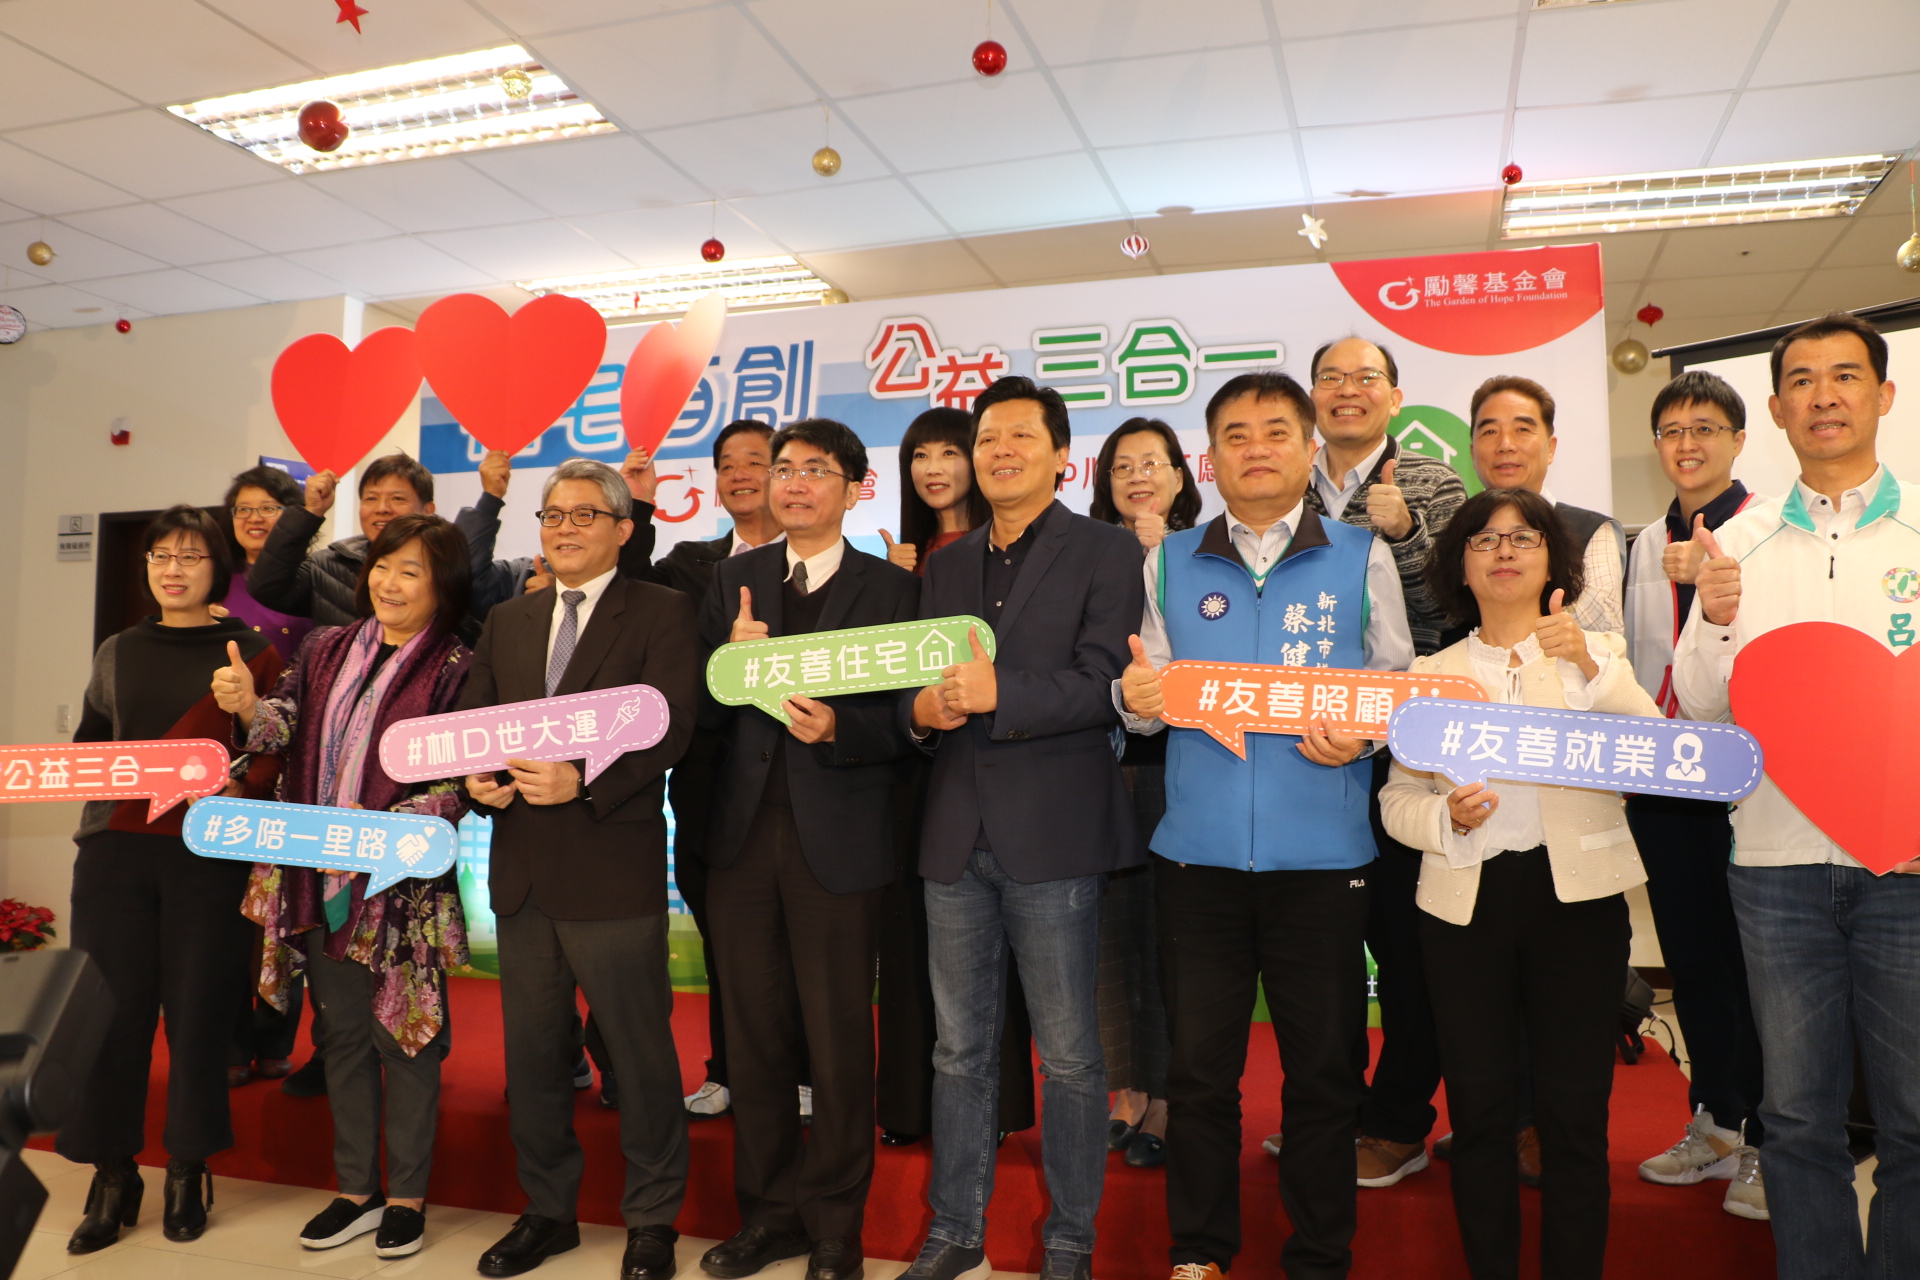 The service center for abused women has been established, and Deputy Minister Hua Jing Qun and Deputy Secretary-general Zhu Tizhi both attended for promoting public housing. Photograph: New Taipei City Government